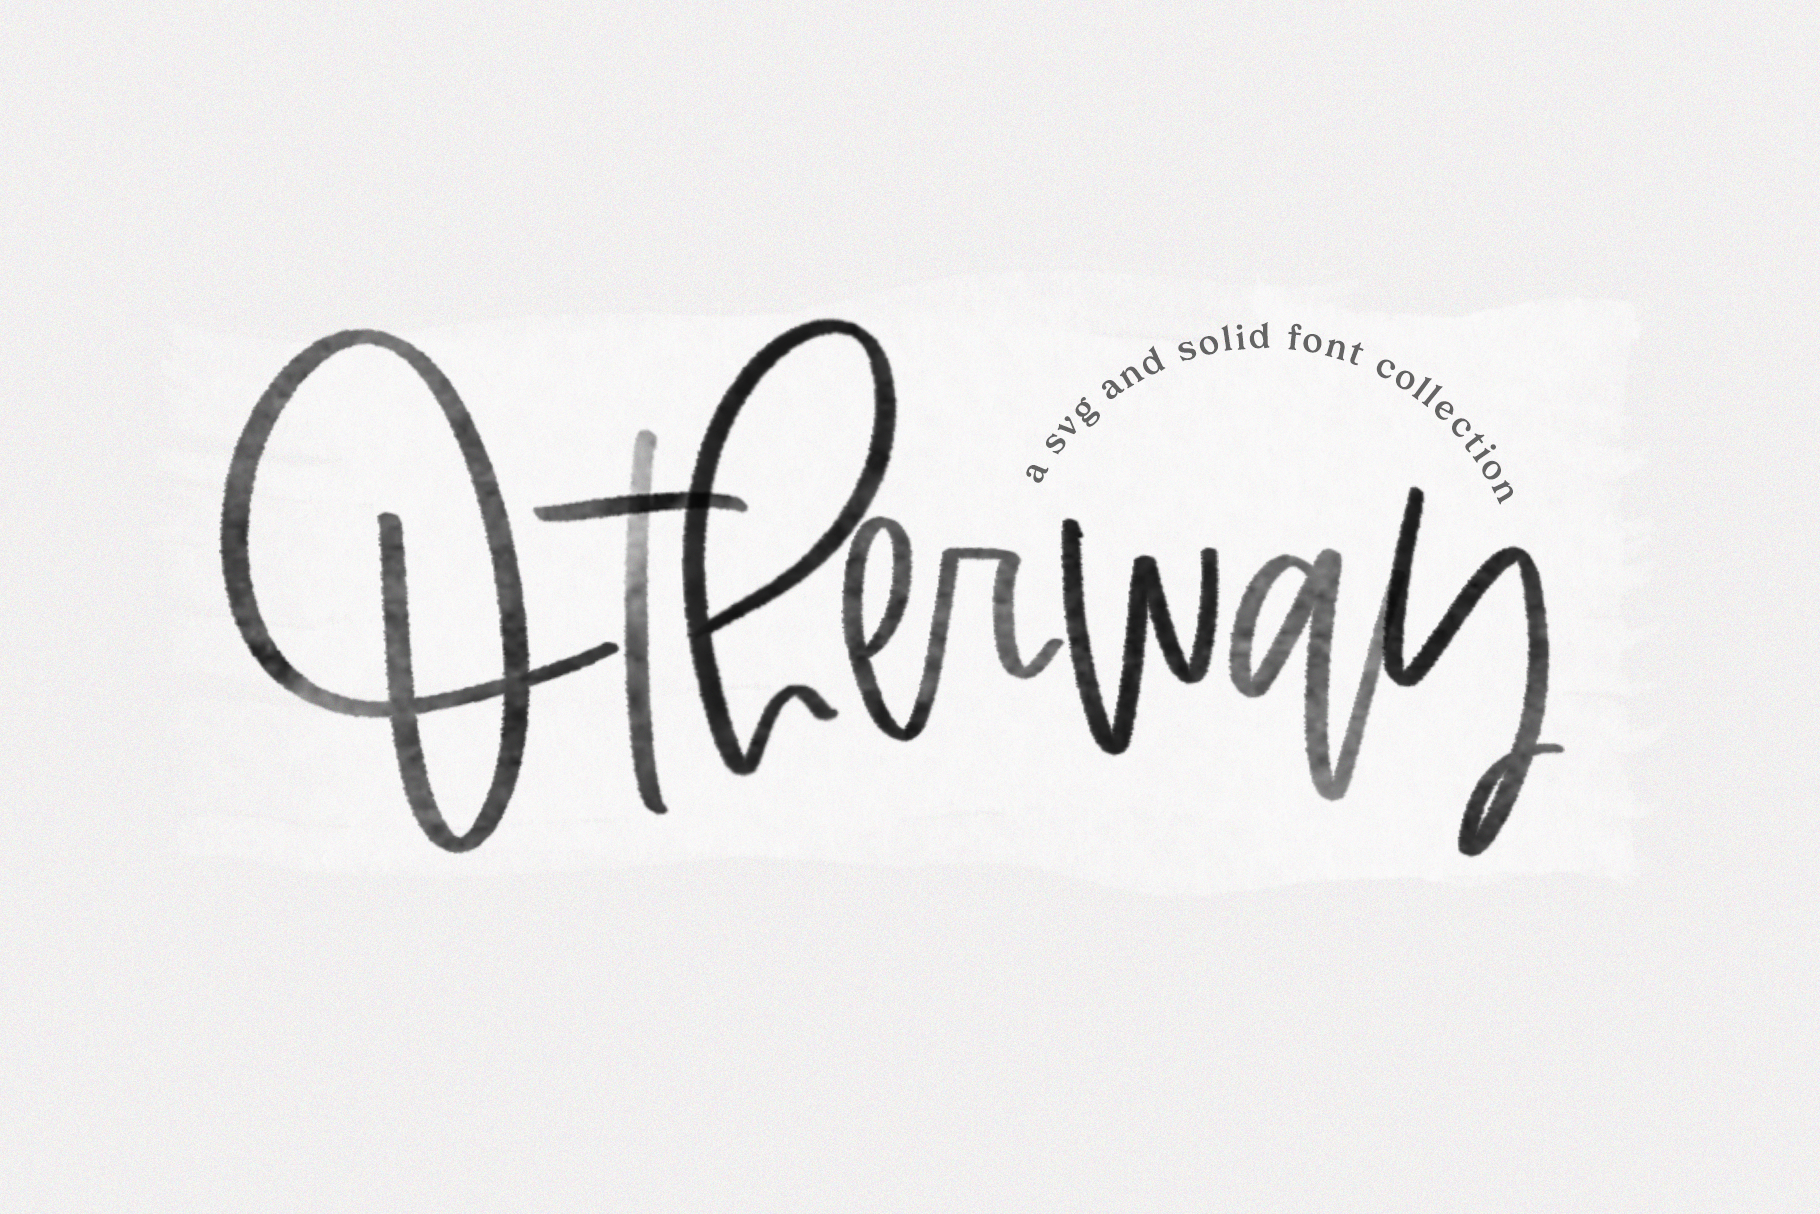 Otherway Svg Amp Solid Script Font By Ka Designs Thehungryjpeg Com